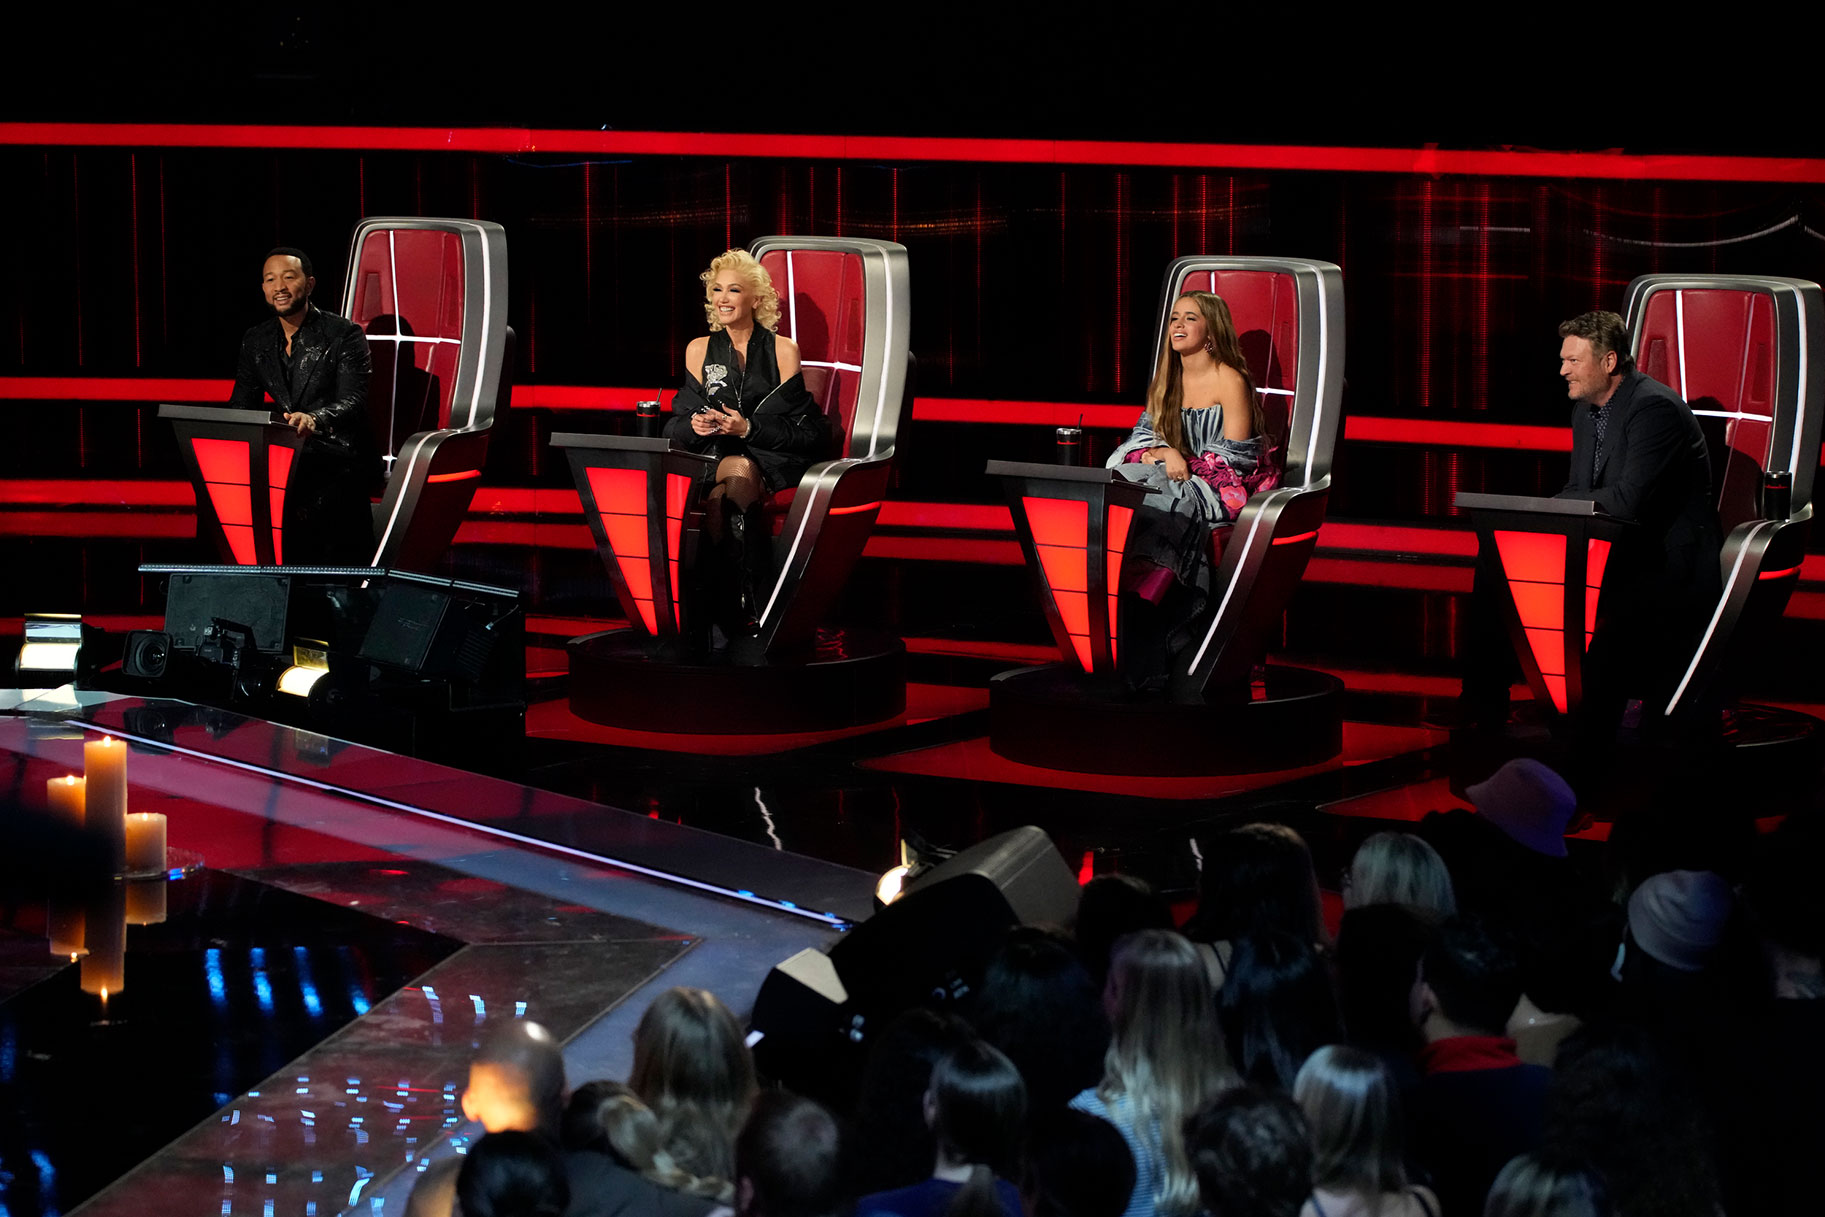 The Voice Judges seated together